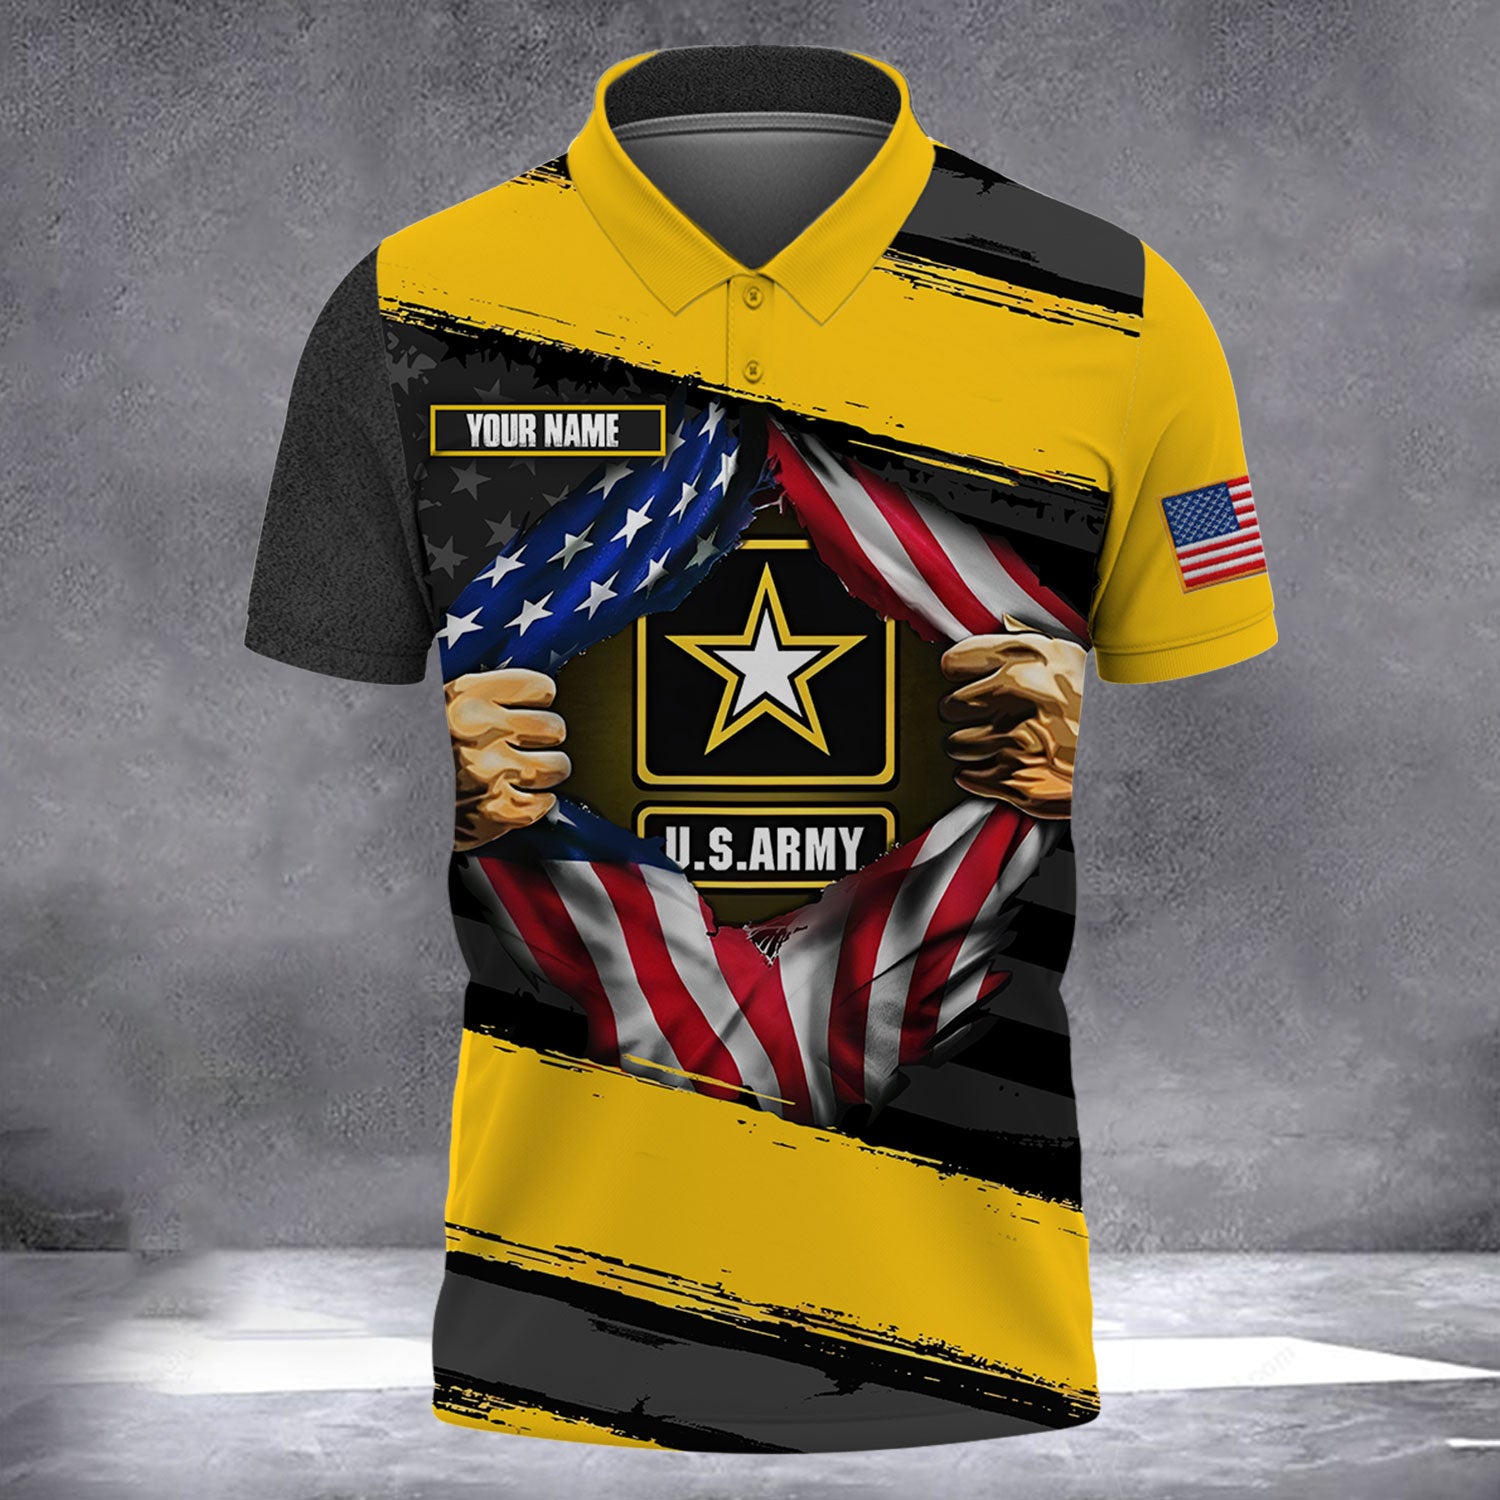 United States Army - American Soldiers EST 1775 - Customized U.S. Veteran Polo Shirt, Gift For Veterans